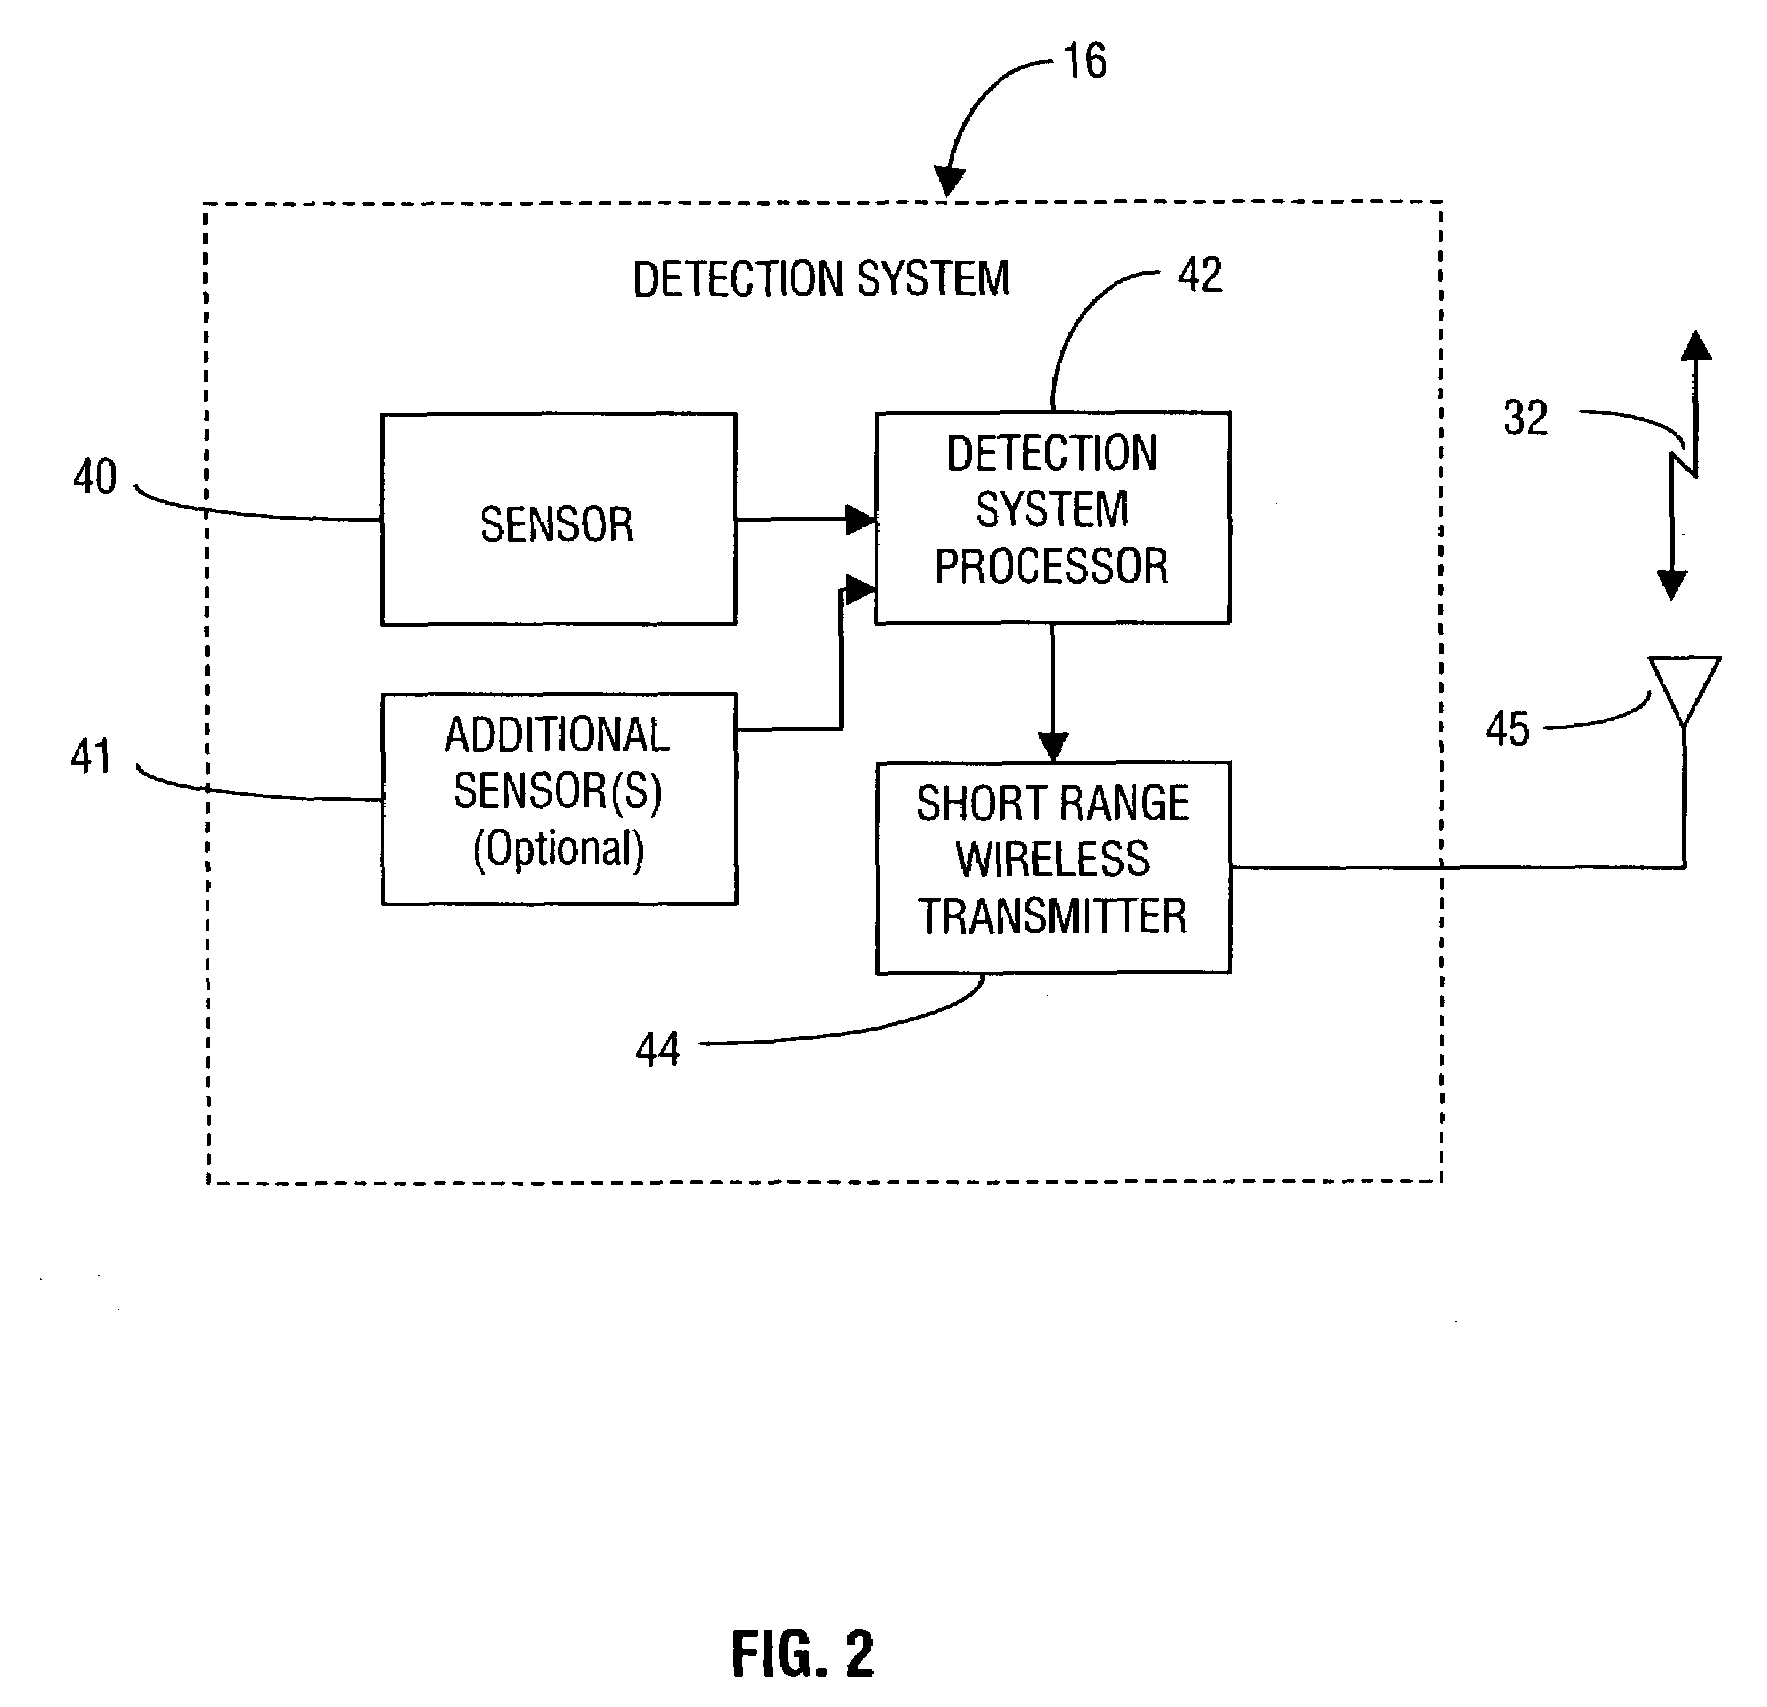 Method and apparatus for communicating emergency information using wireless devices